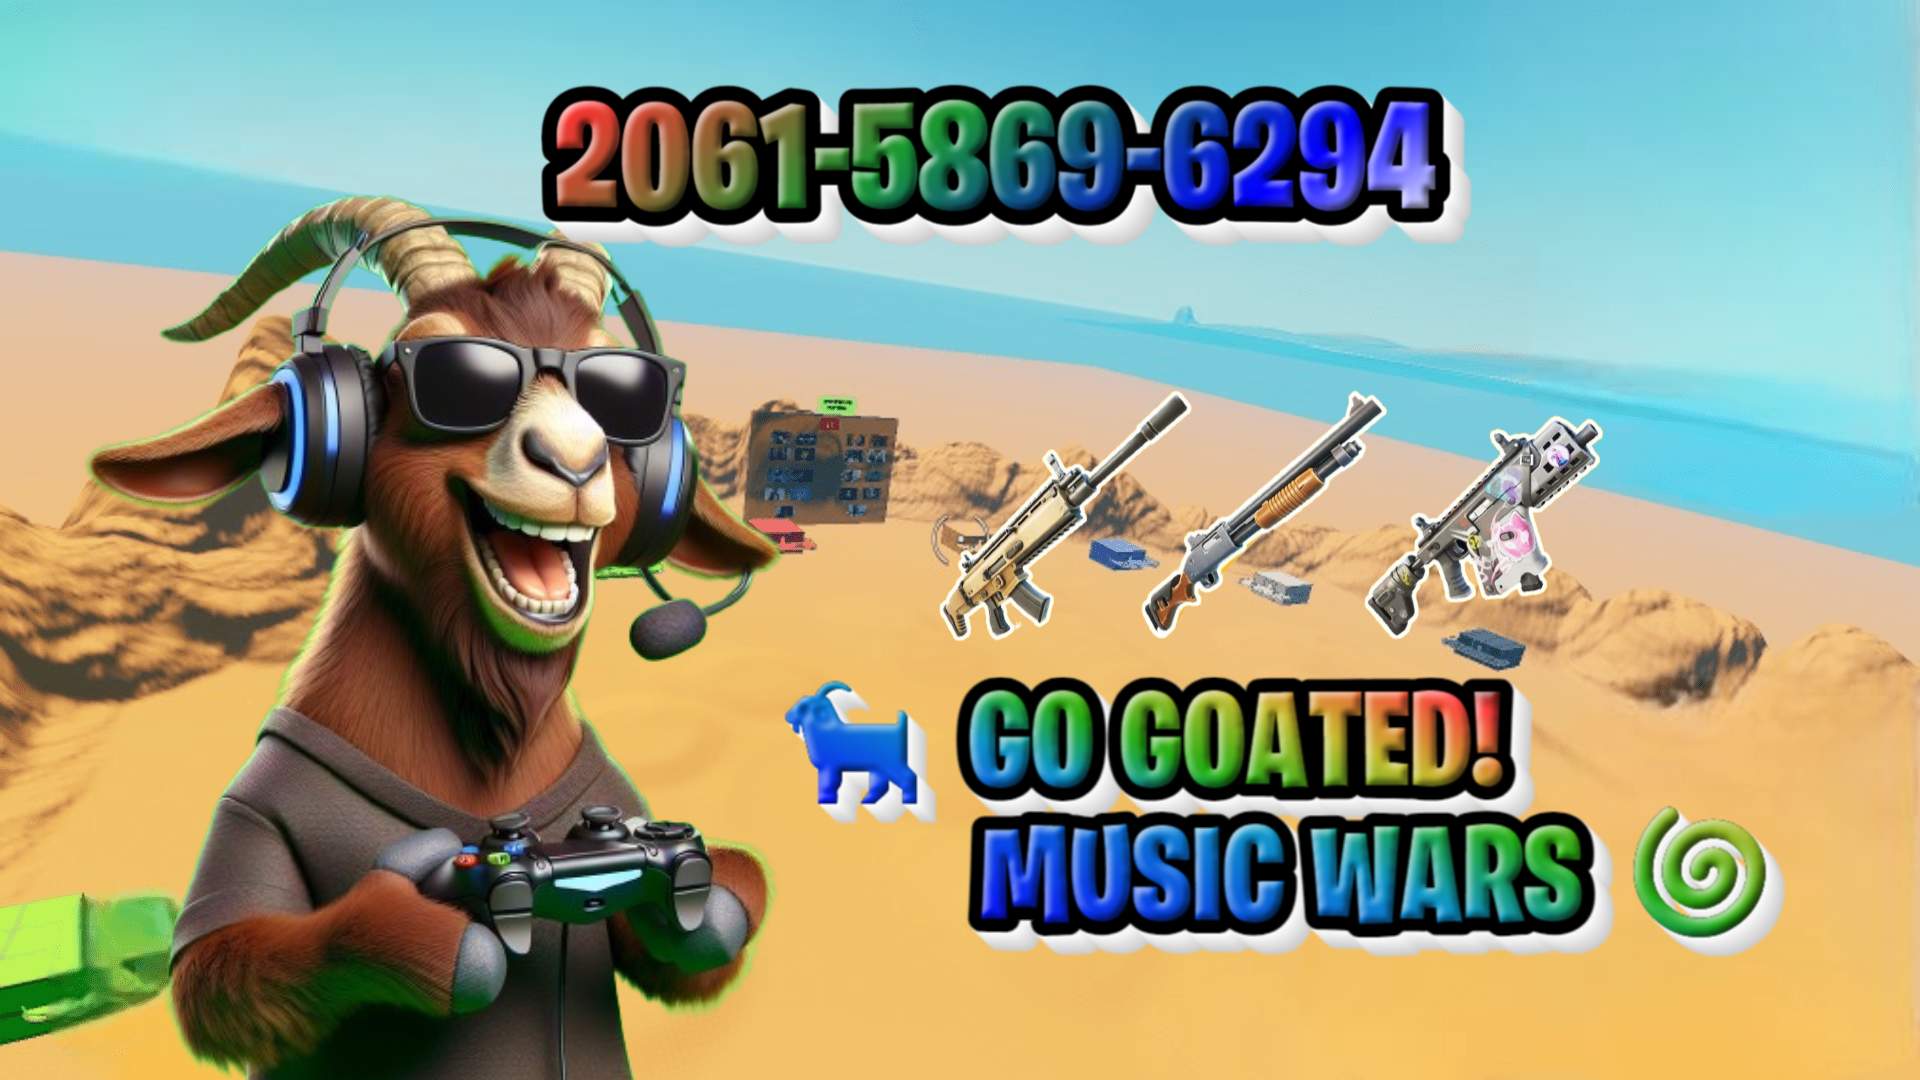 🐐 GO GOATED! MUSIC WARS 🌀